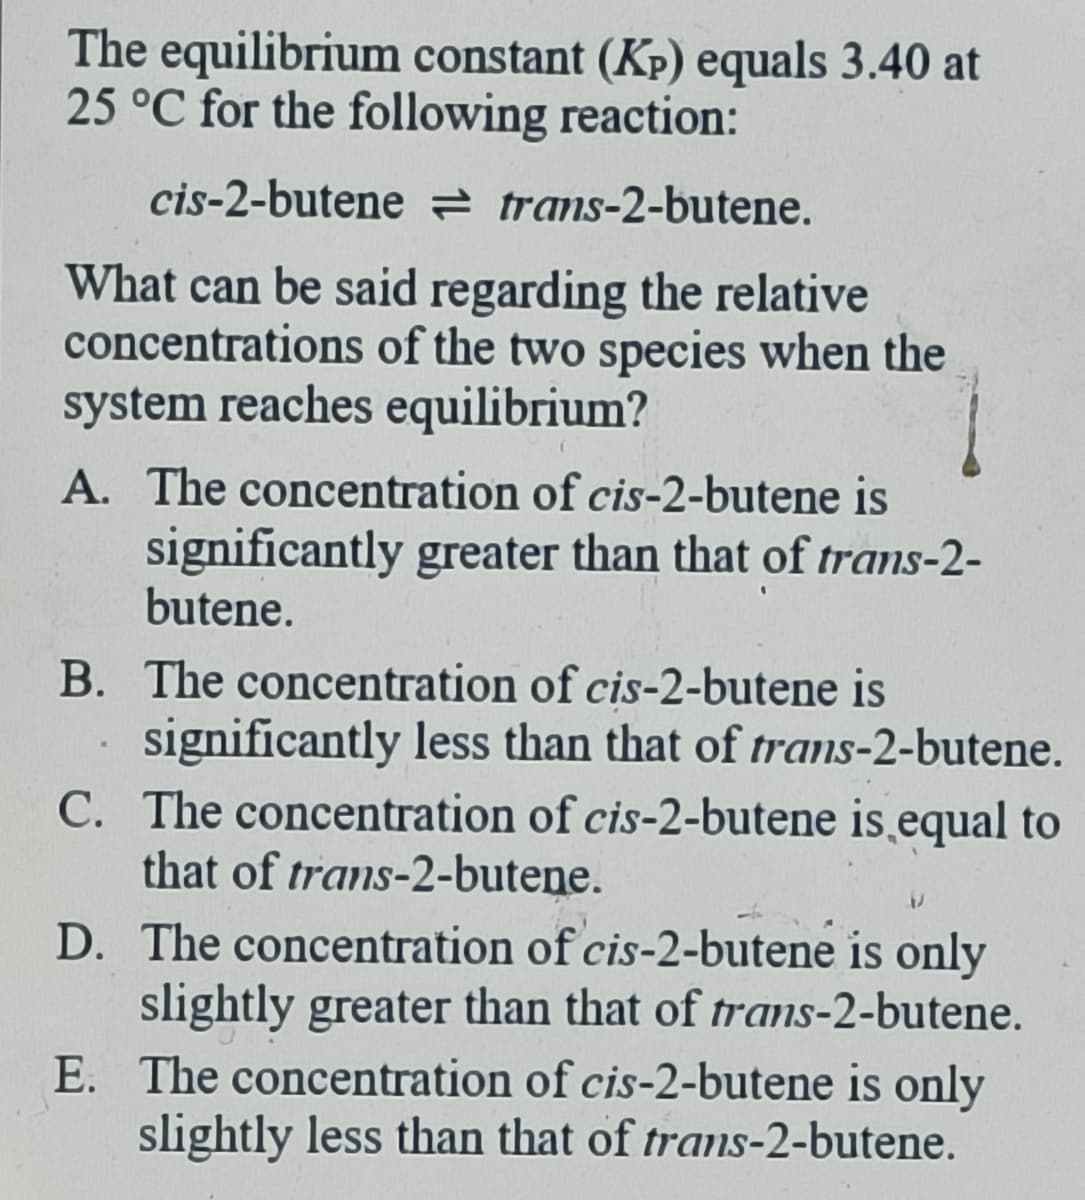 The equilibrium constant (KP) equals 3.40 at
25 °C for the following reaction:
cis-2-butene trans-2-butene.
What can be said regarding the relative
concentrations of the two species when the
system reaches equilibrium?
A. The concentration of cis-2-butene is
significantly greater than that of trans-2-
butene.
B. The concentration of cis-2-butene is
significantly less than that of trans-2-butene.
C. The concentration of cis-2-butene is equal to
that of trans-2-butene.
D. The concentration of cis-2-butene is only
slightly greater than that of trans-2-butene.
E. The concentration of cis-2-butene is only
slightly less than that of trans-2-butene.